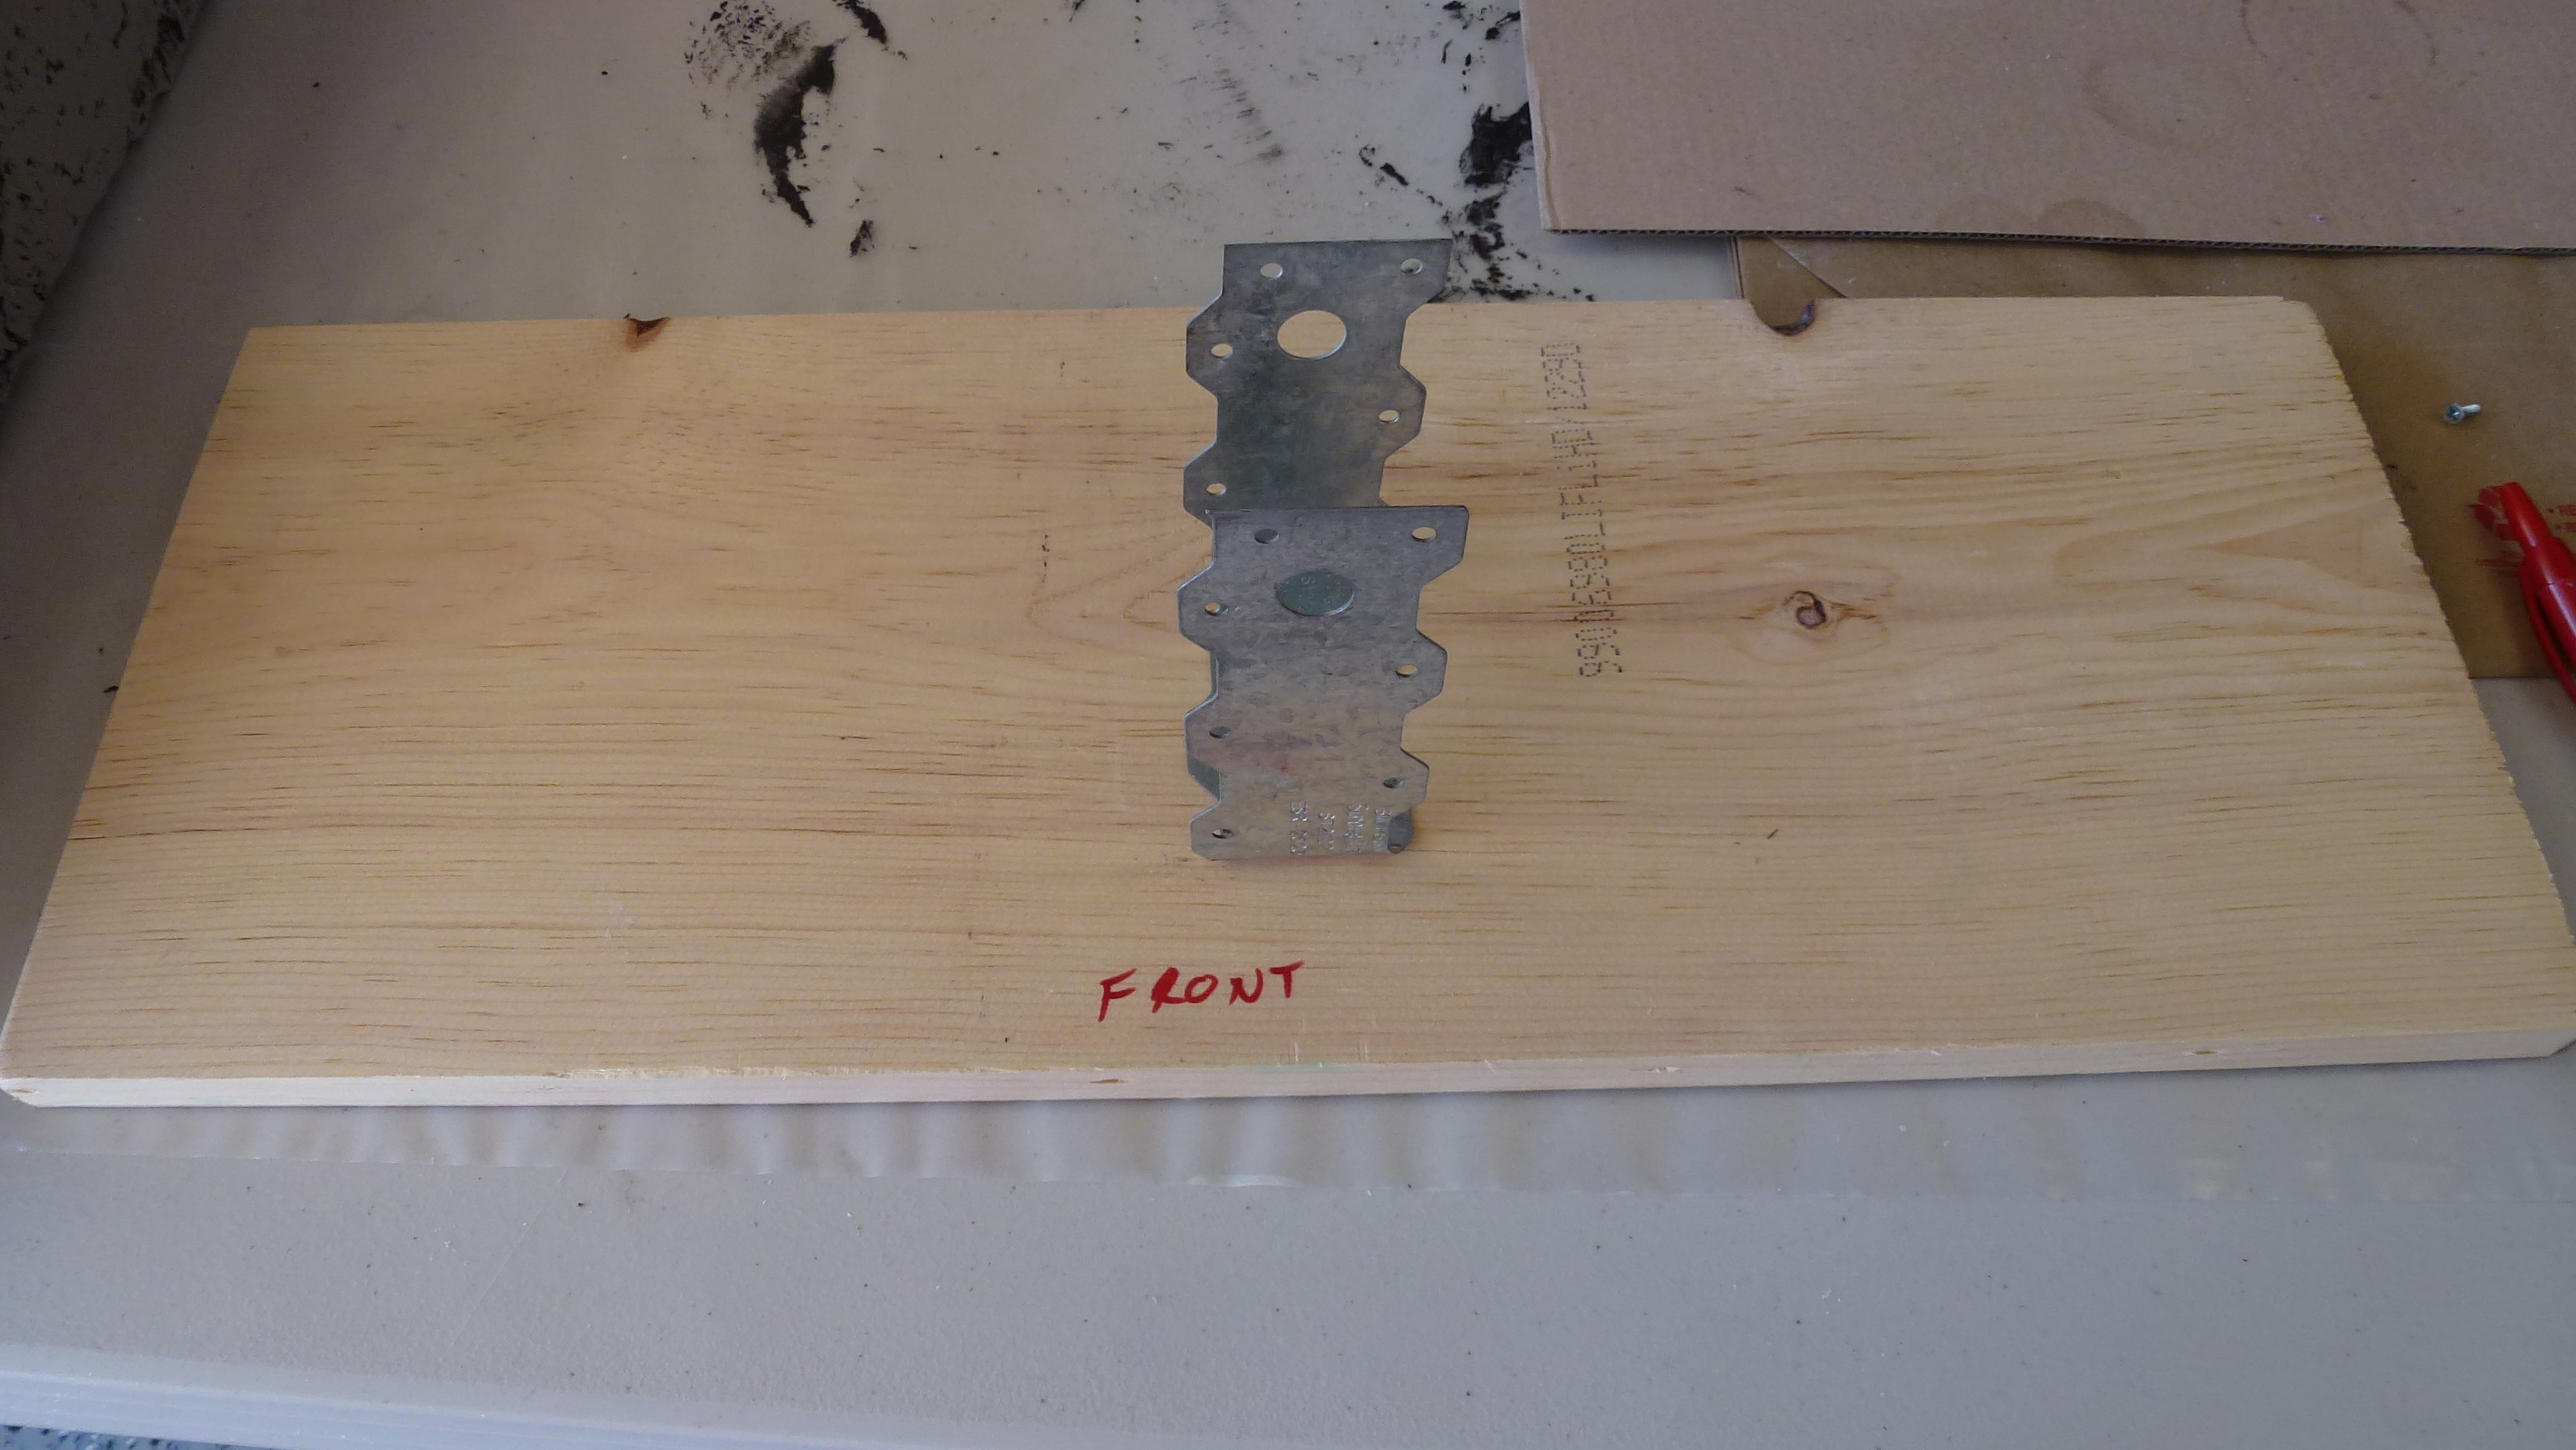 the U-bracket is secured to the base board with wood screws